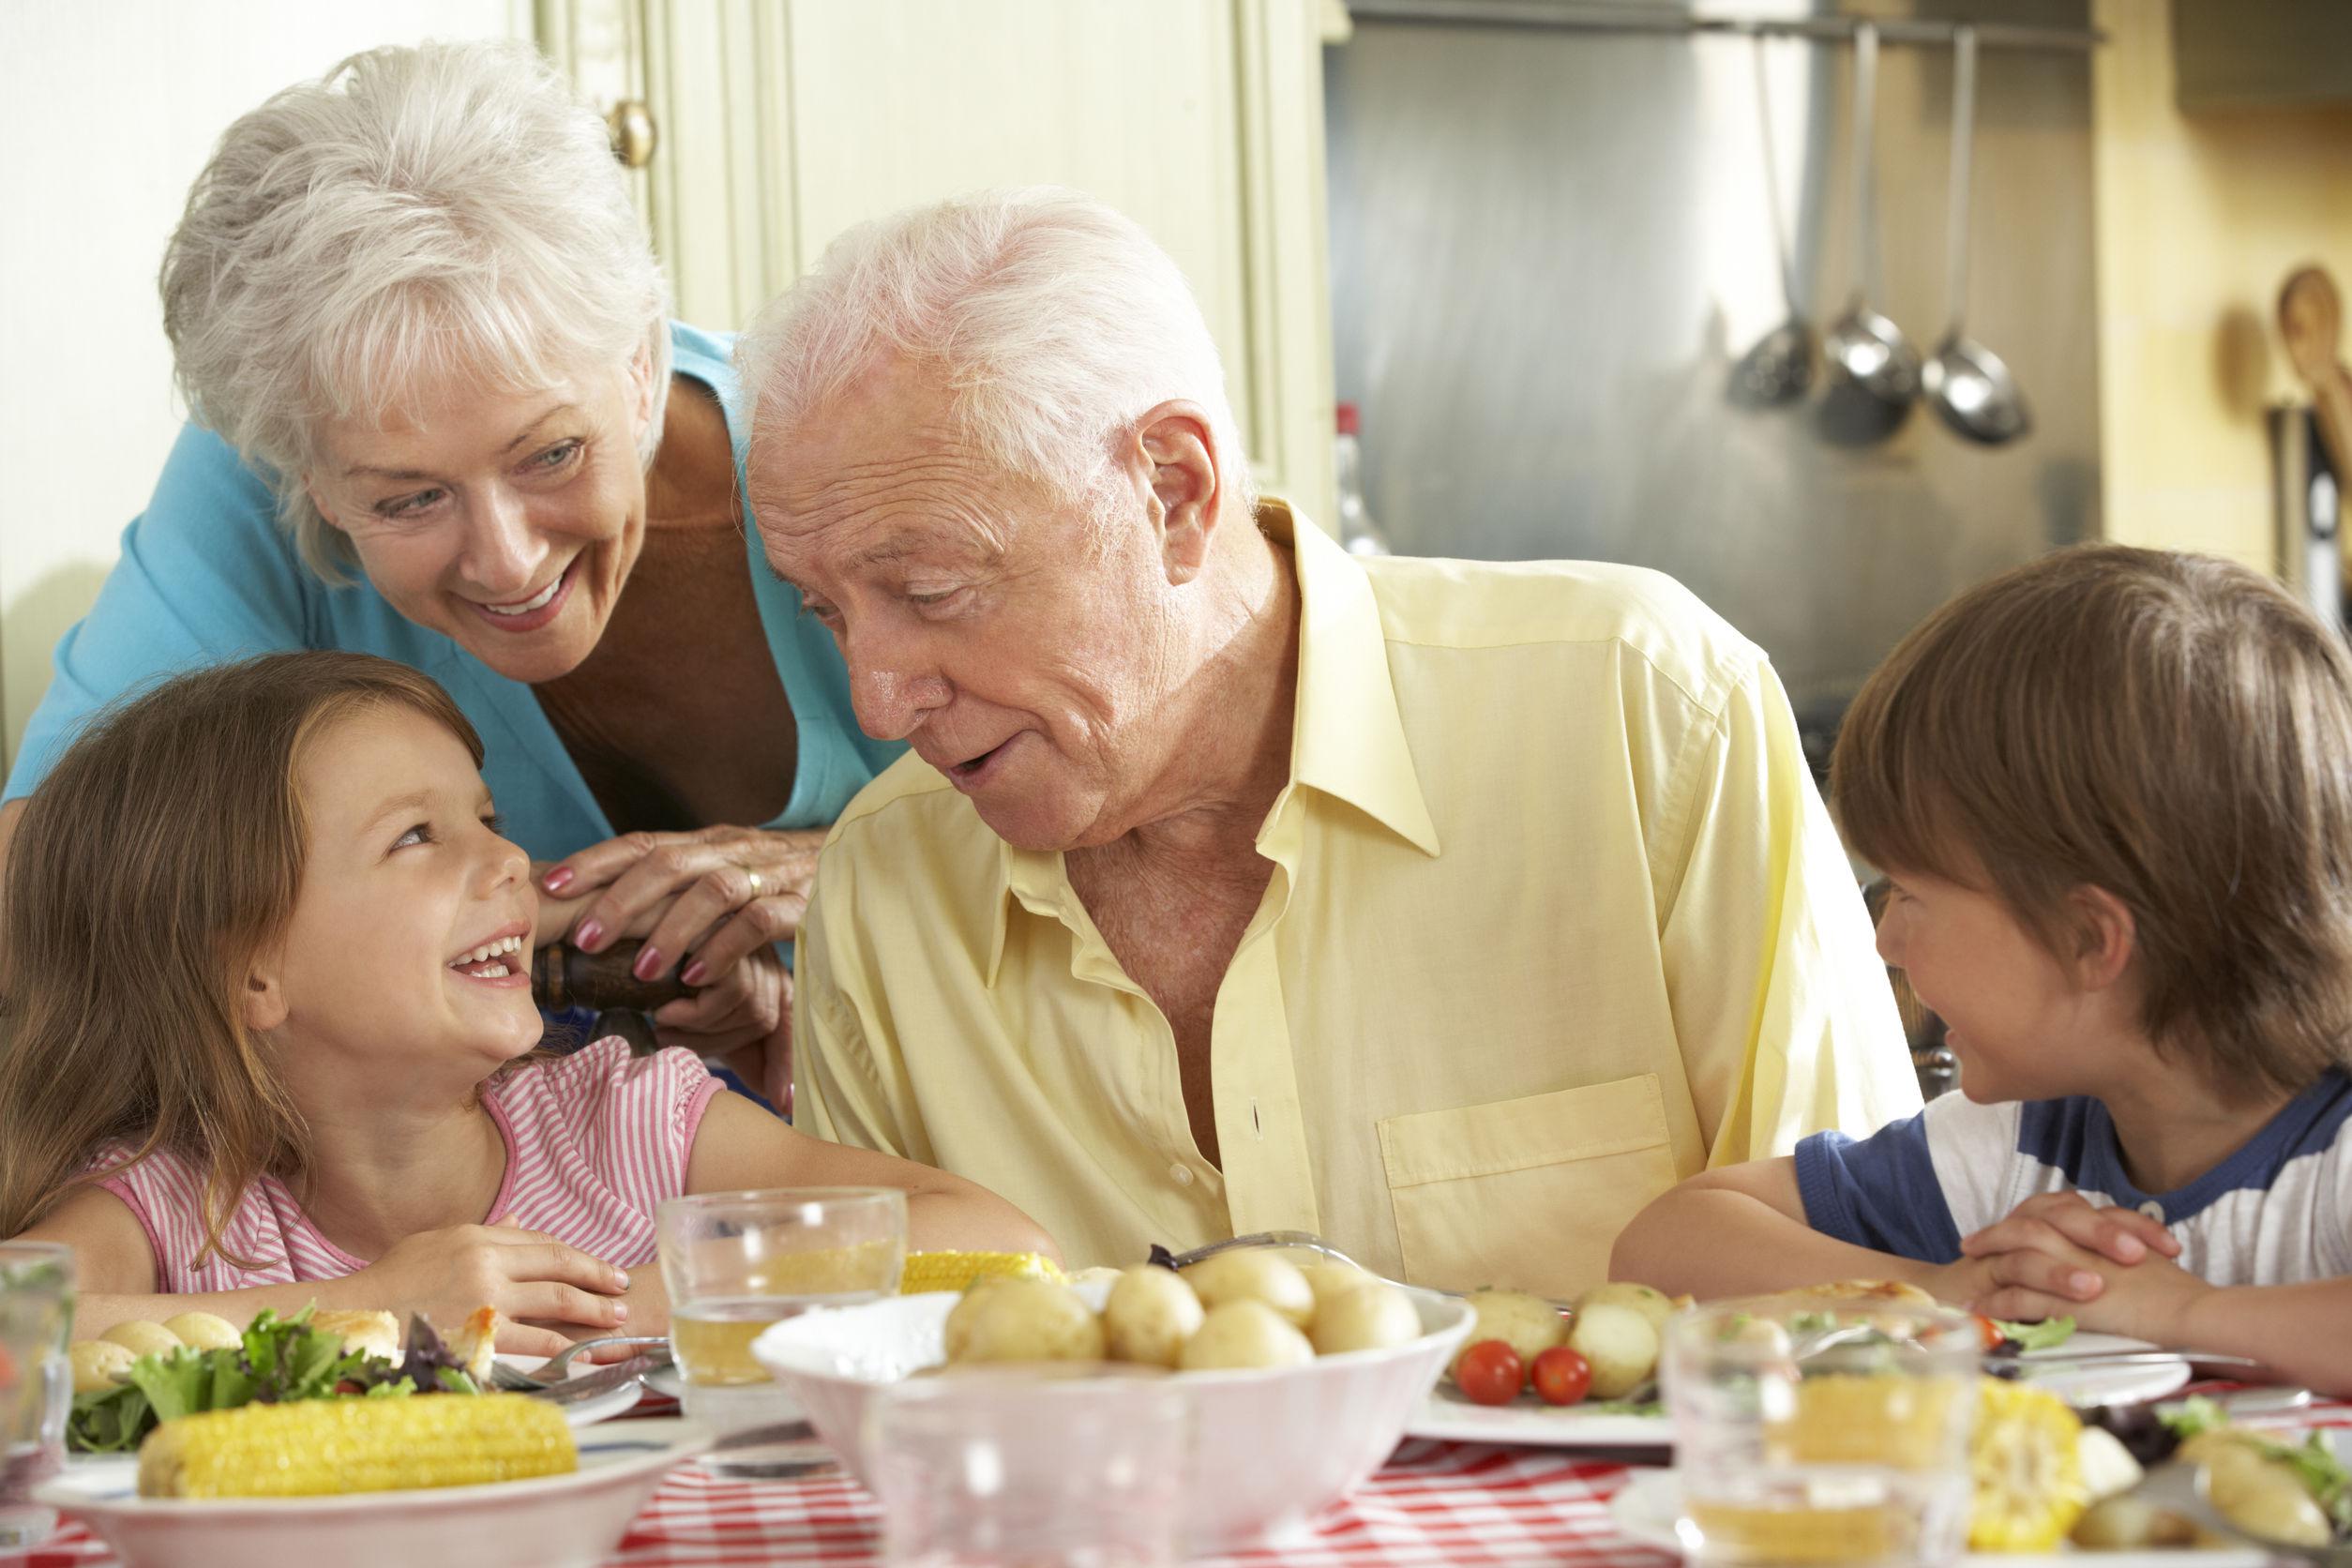 42251126 - grandparents and grandchildren eating meal together in kitchen